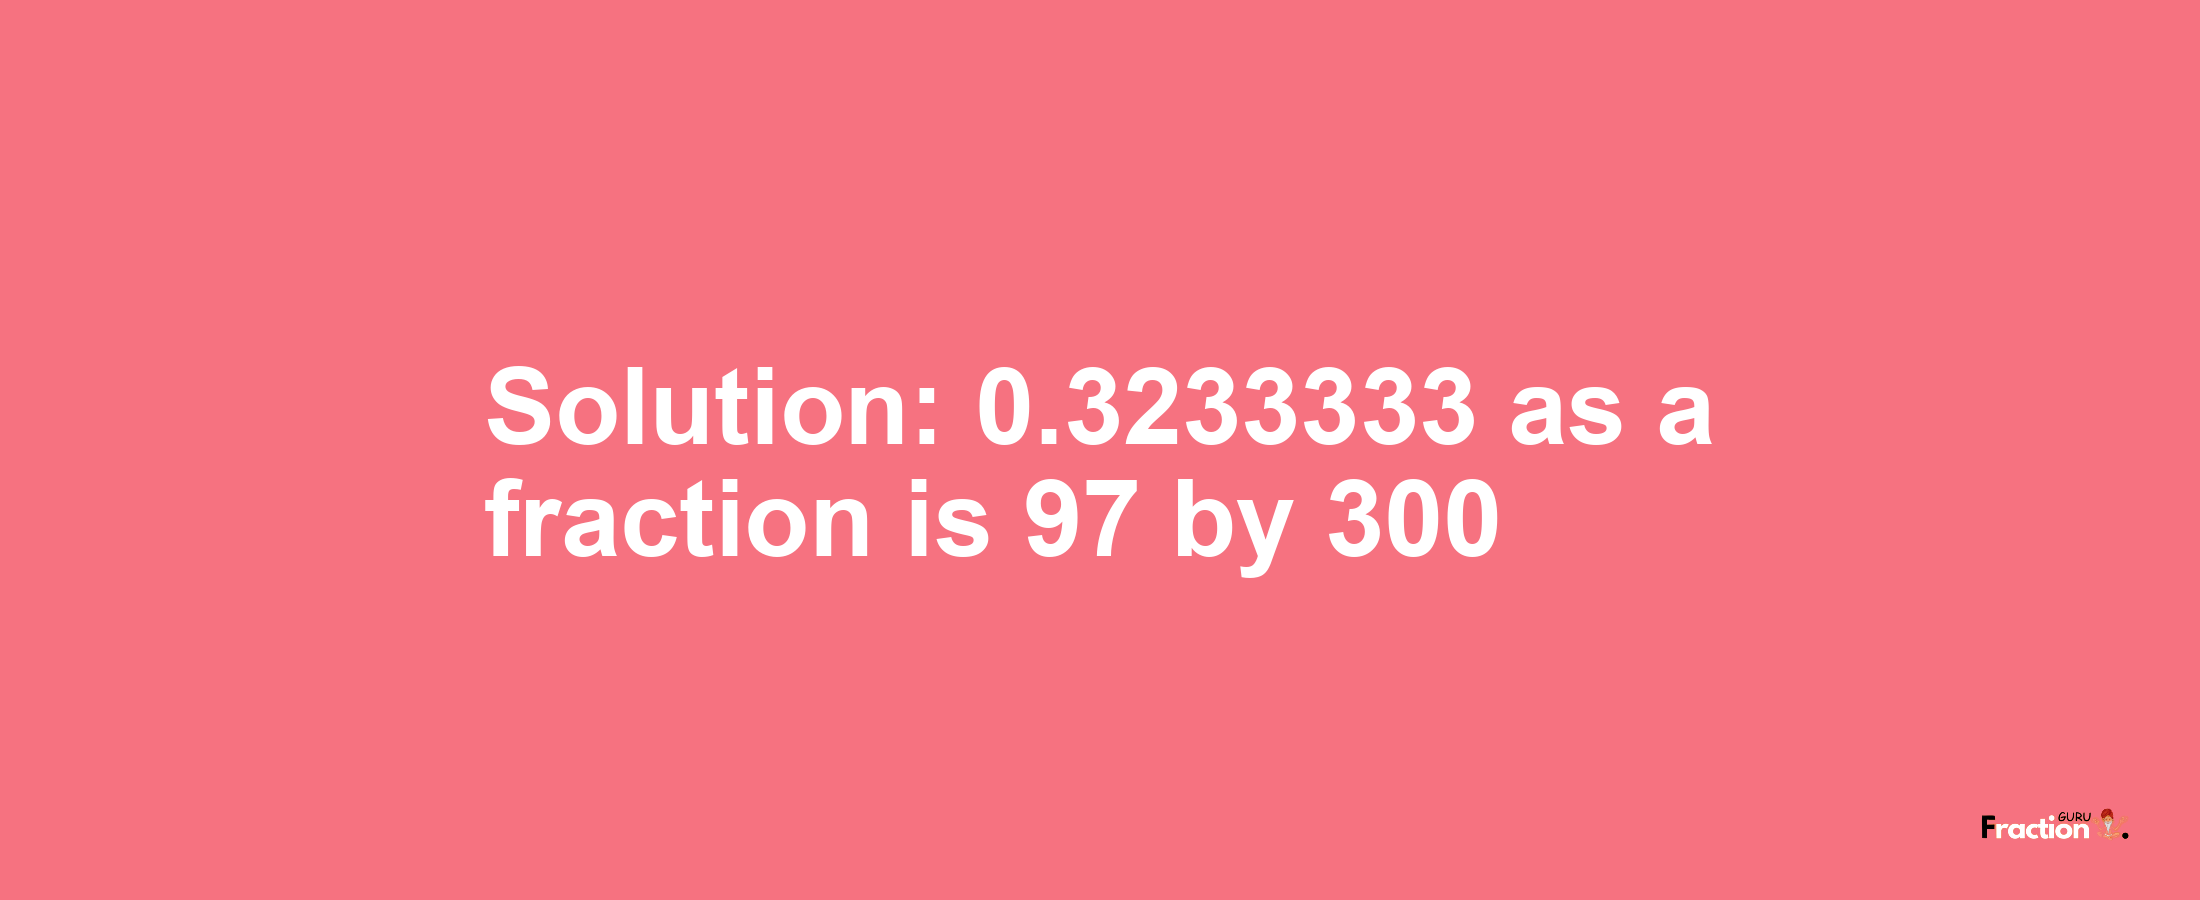 Solution:0.3233333 as a fraction is 97/300